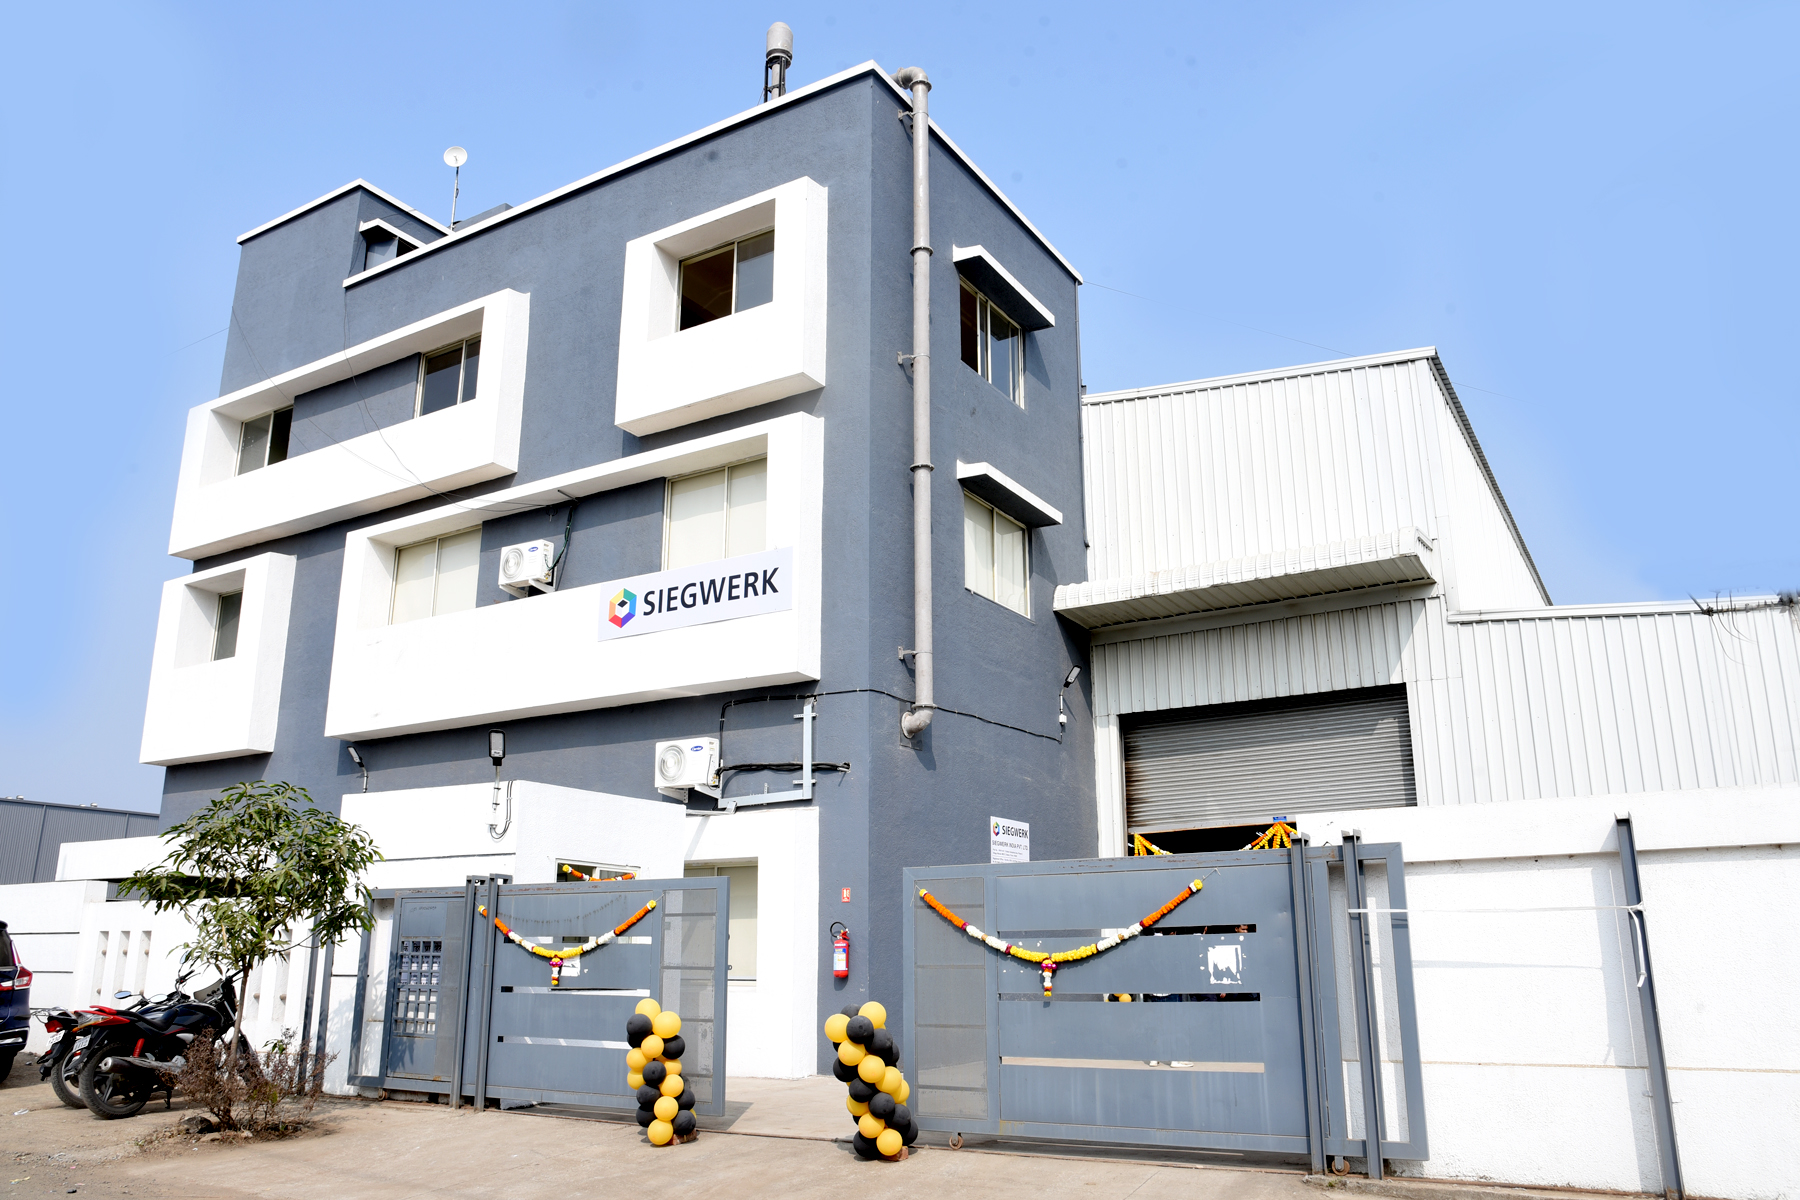 Siegwerk bolsters presence in India with the inauguration of a Colour Matching Centre in Pune